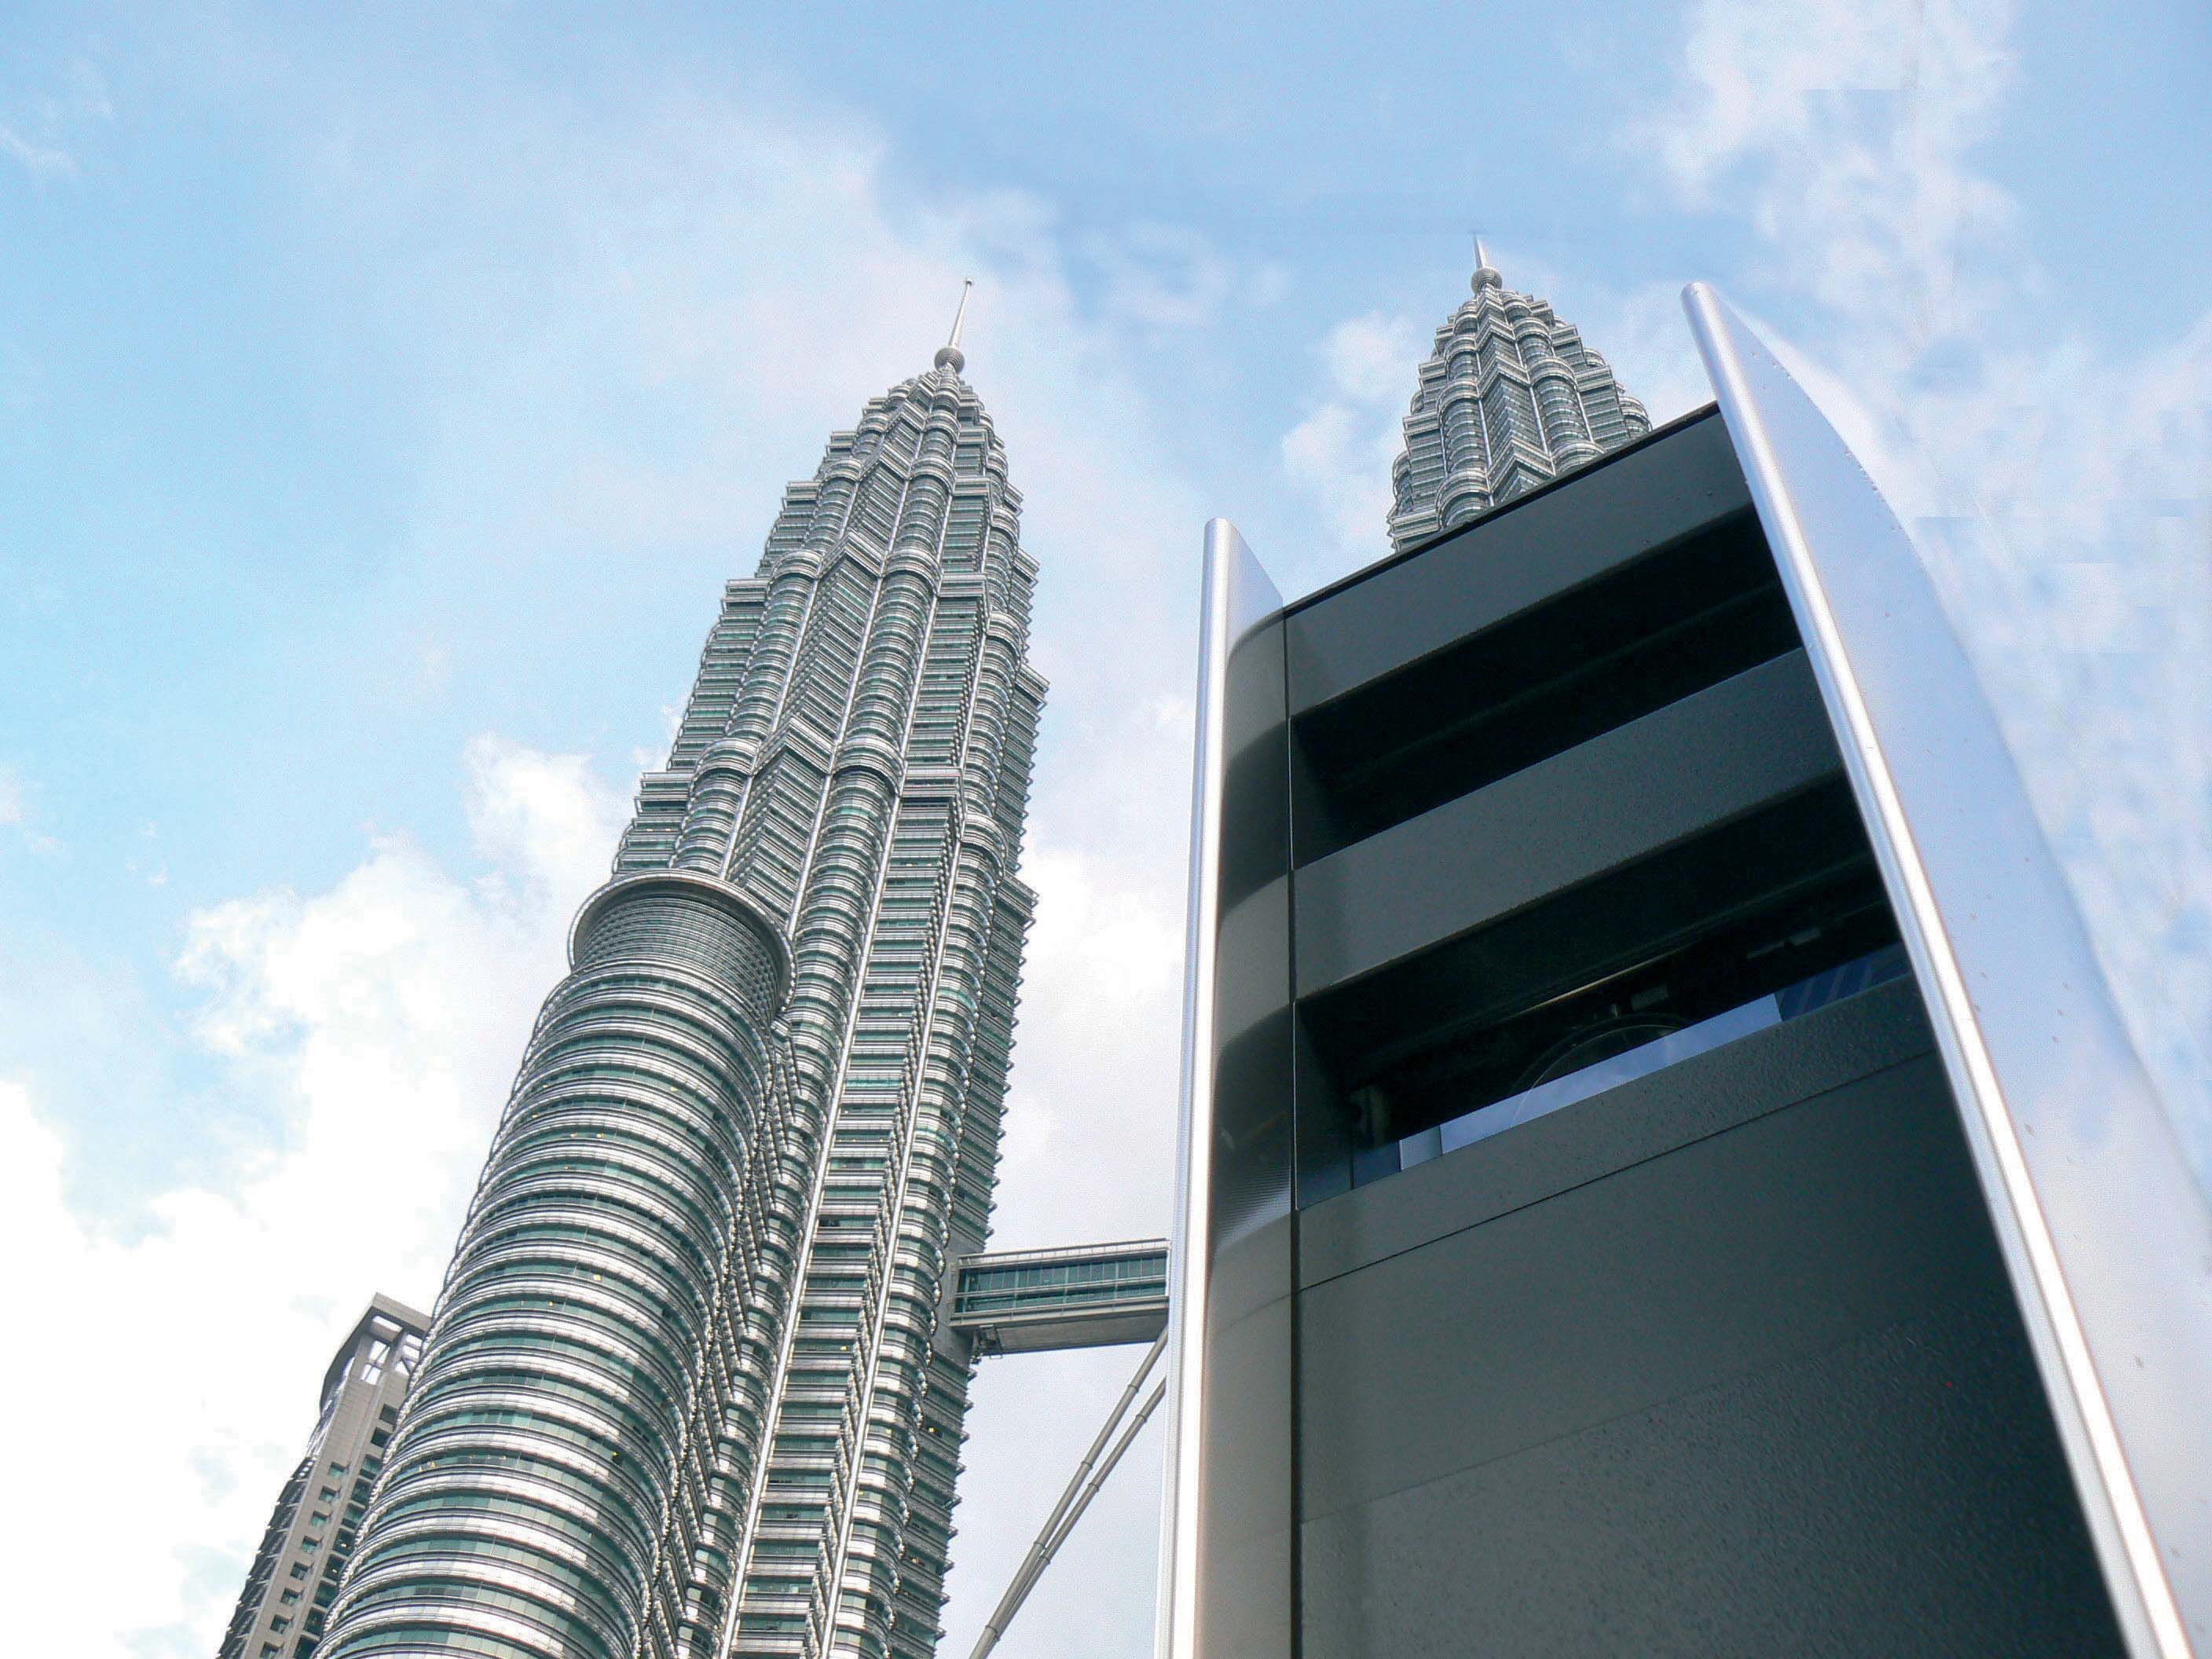 Jenoptik’s enforcement services in Malaysia 